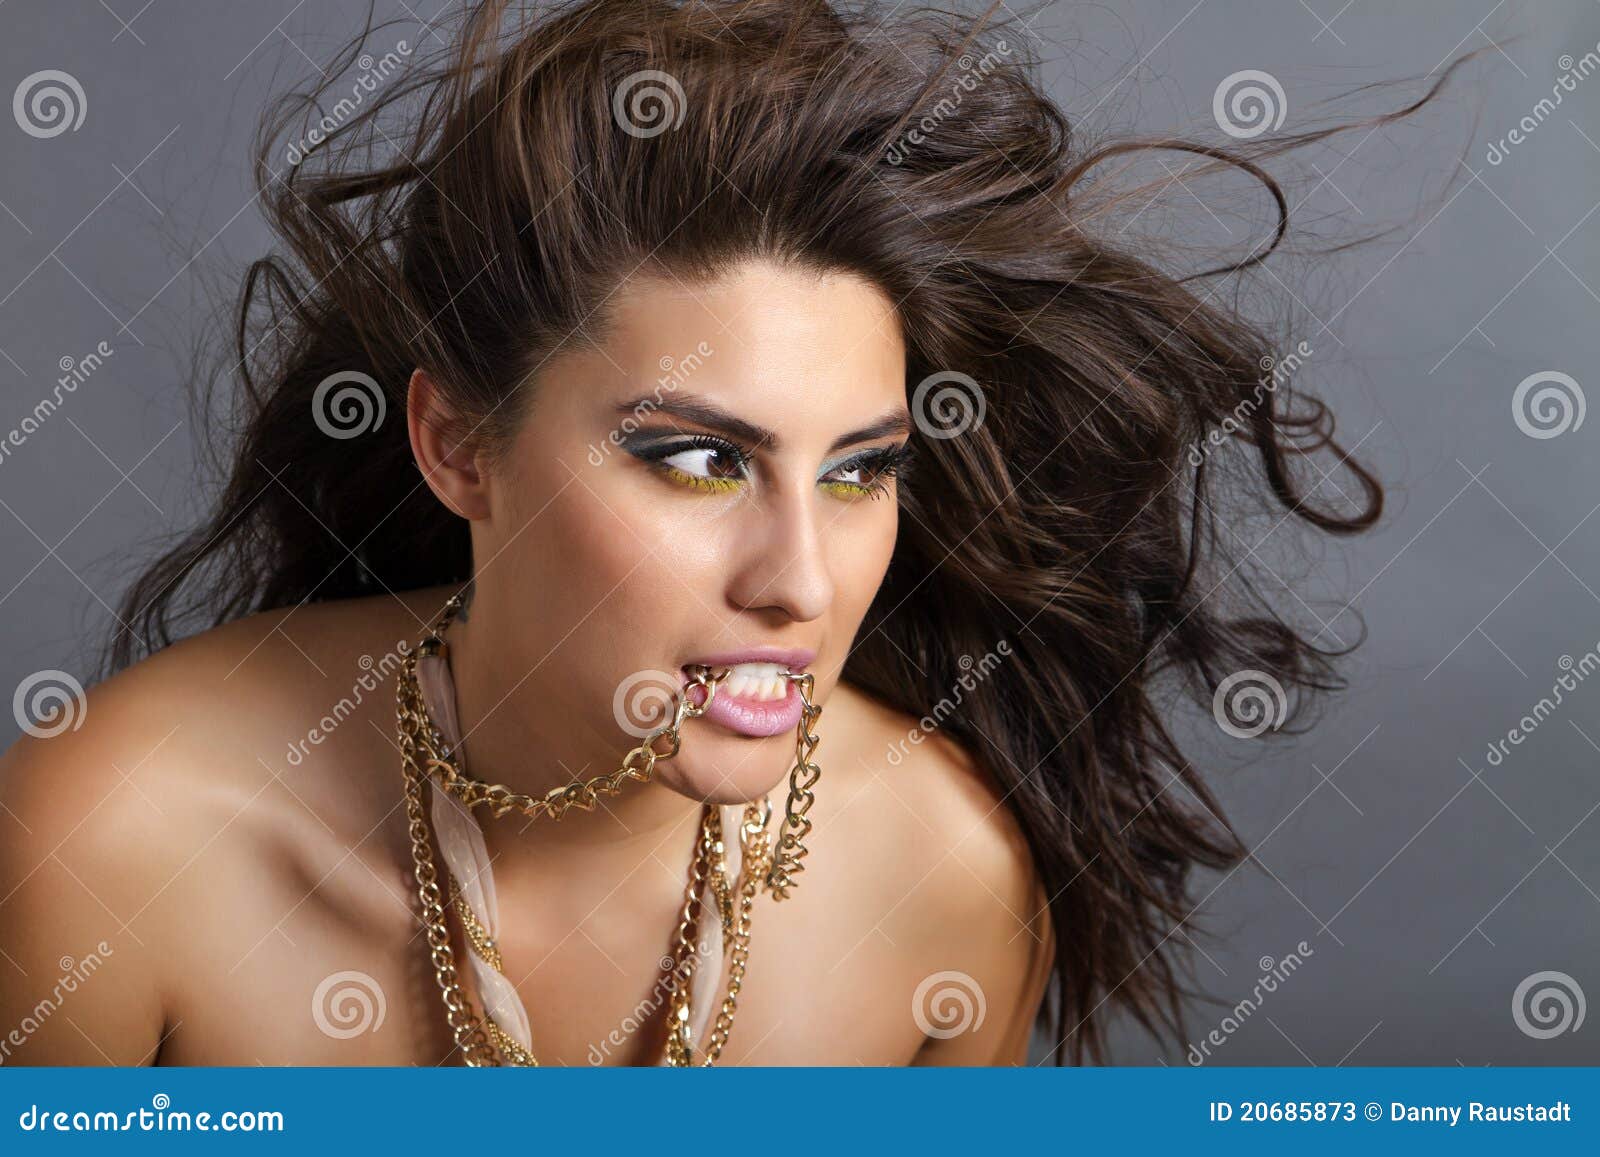 Nude Women Wearing A Necklace And Hair Tied Up Stock Photo 